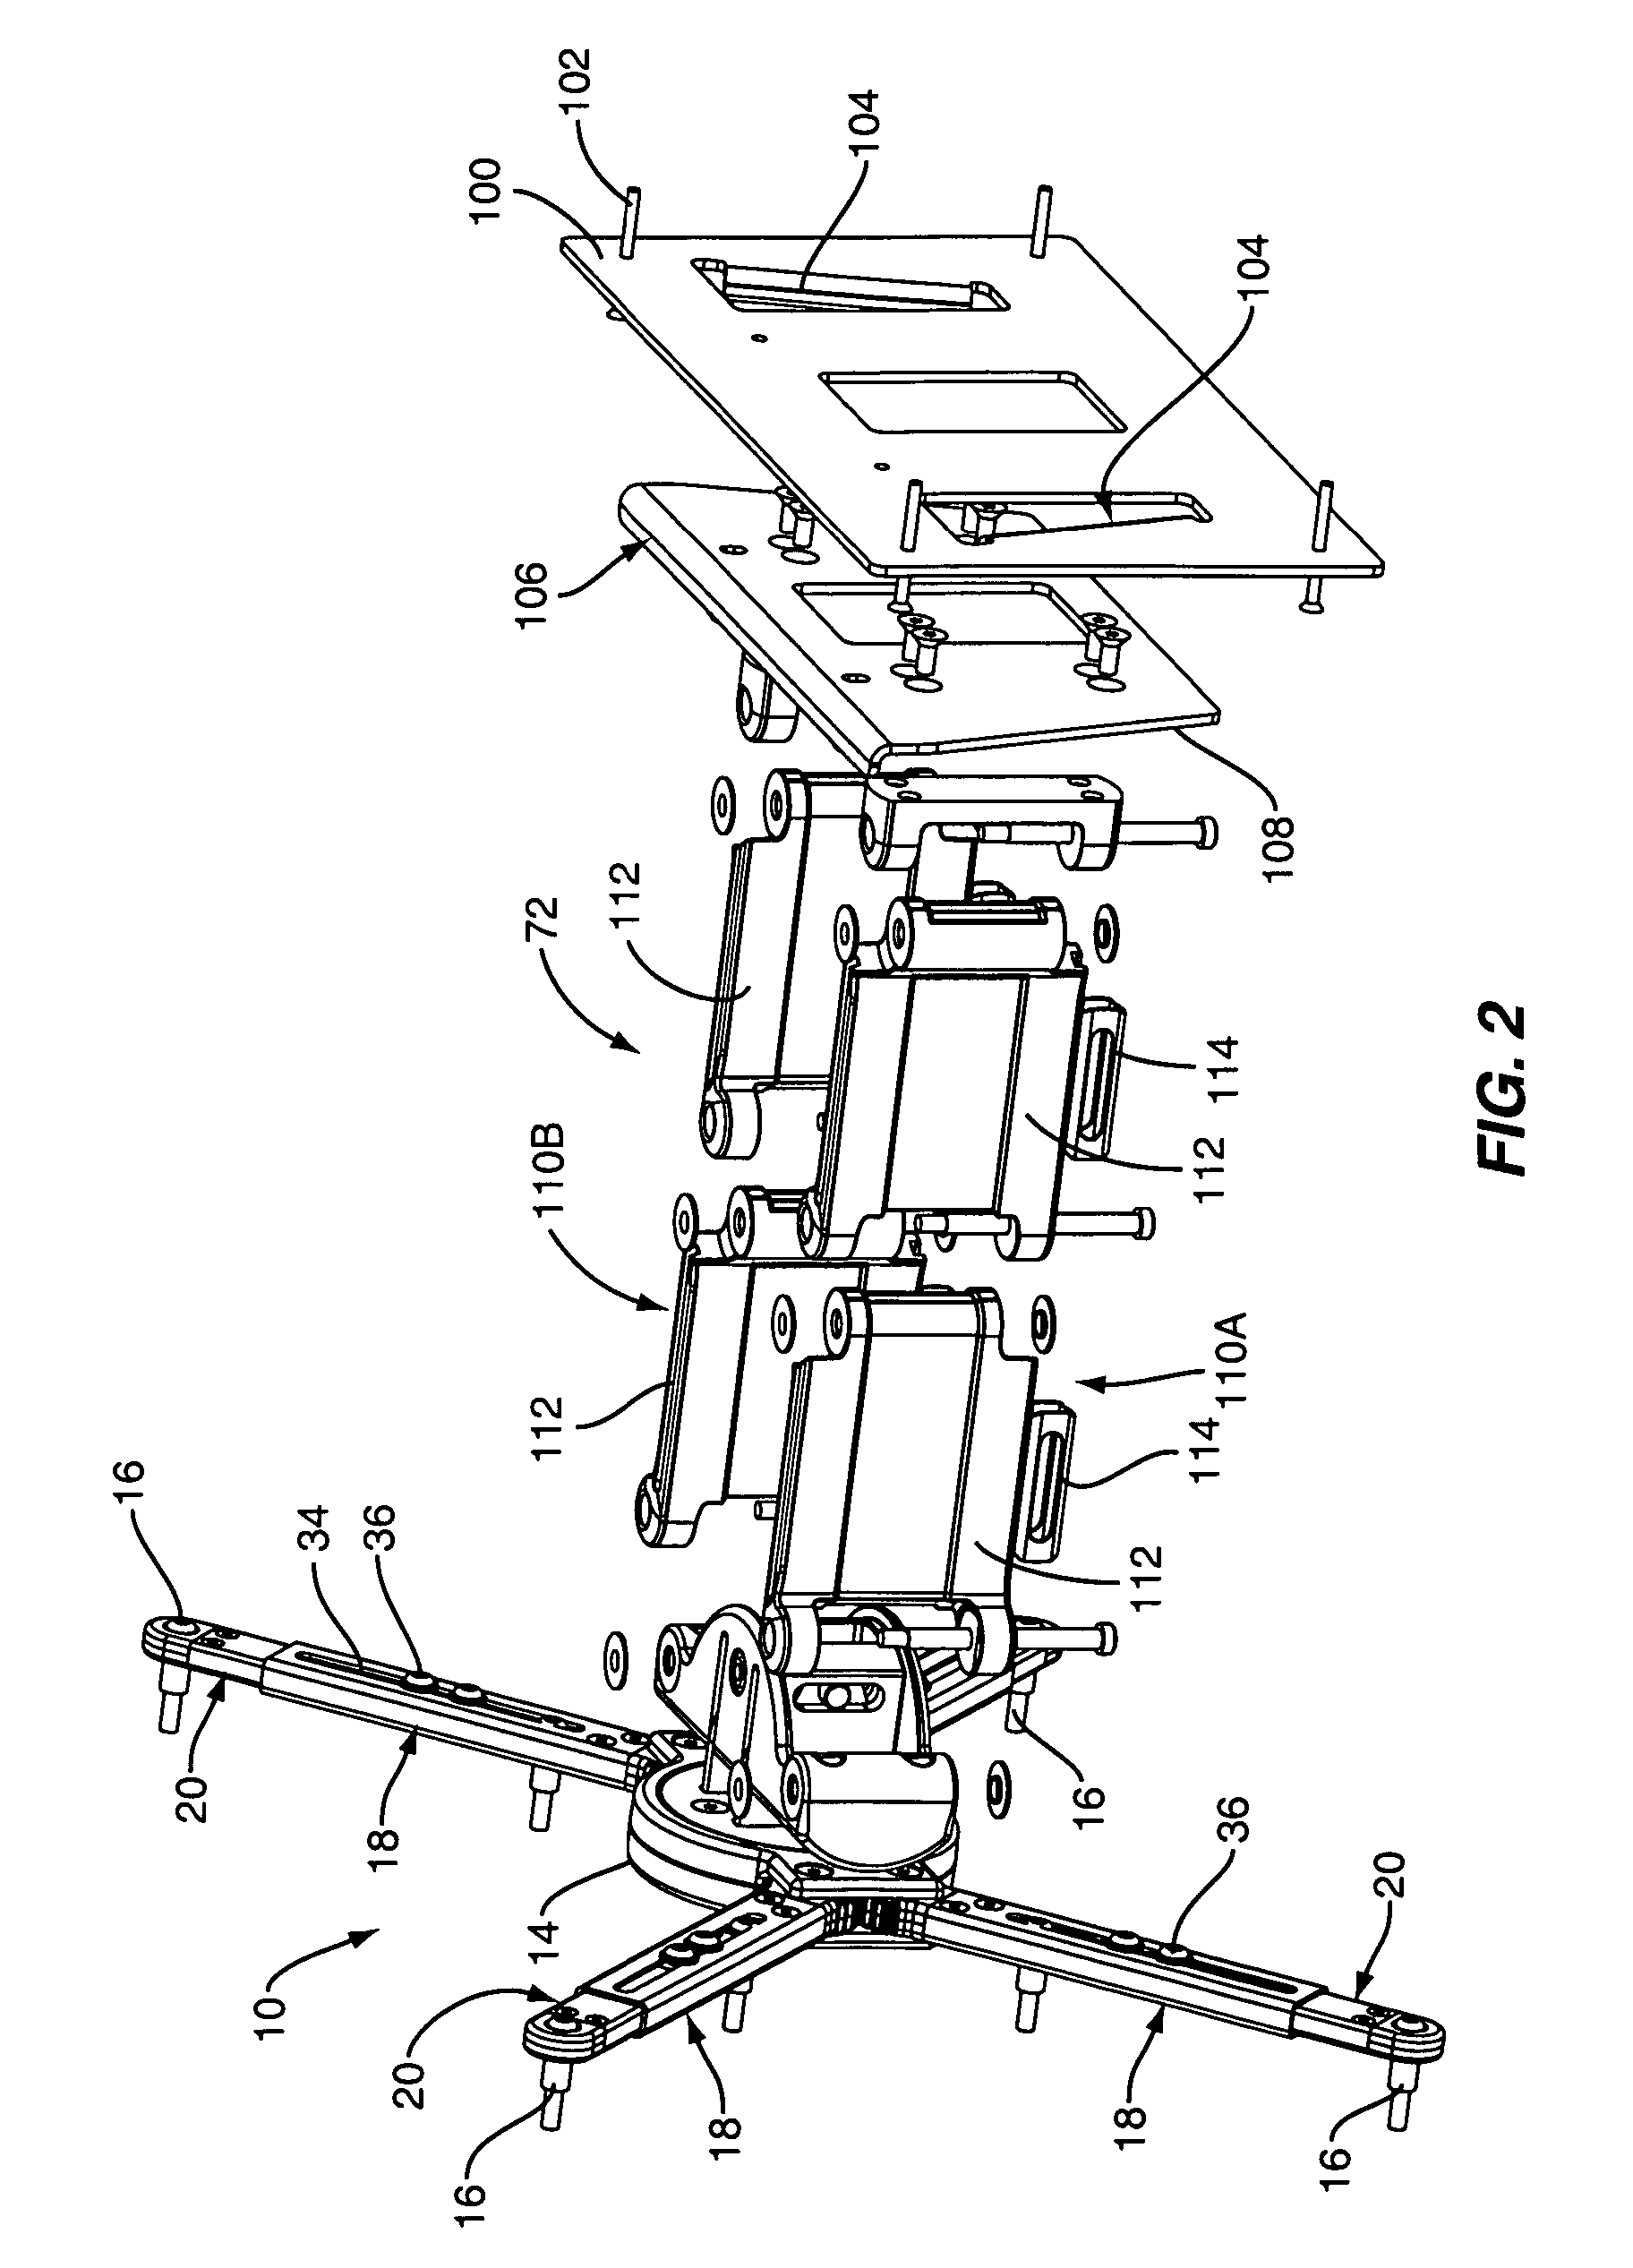 Universal mounting system for a flat panel display